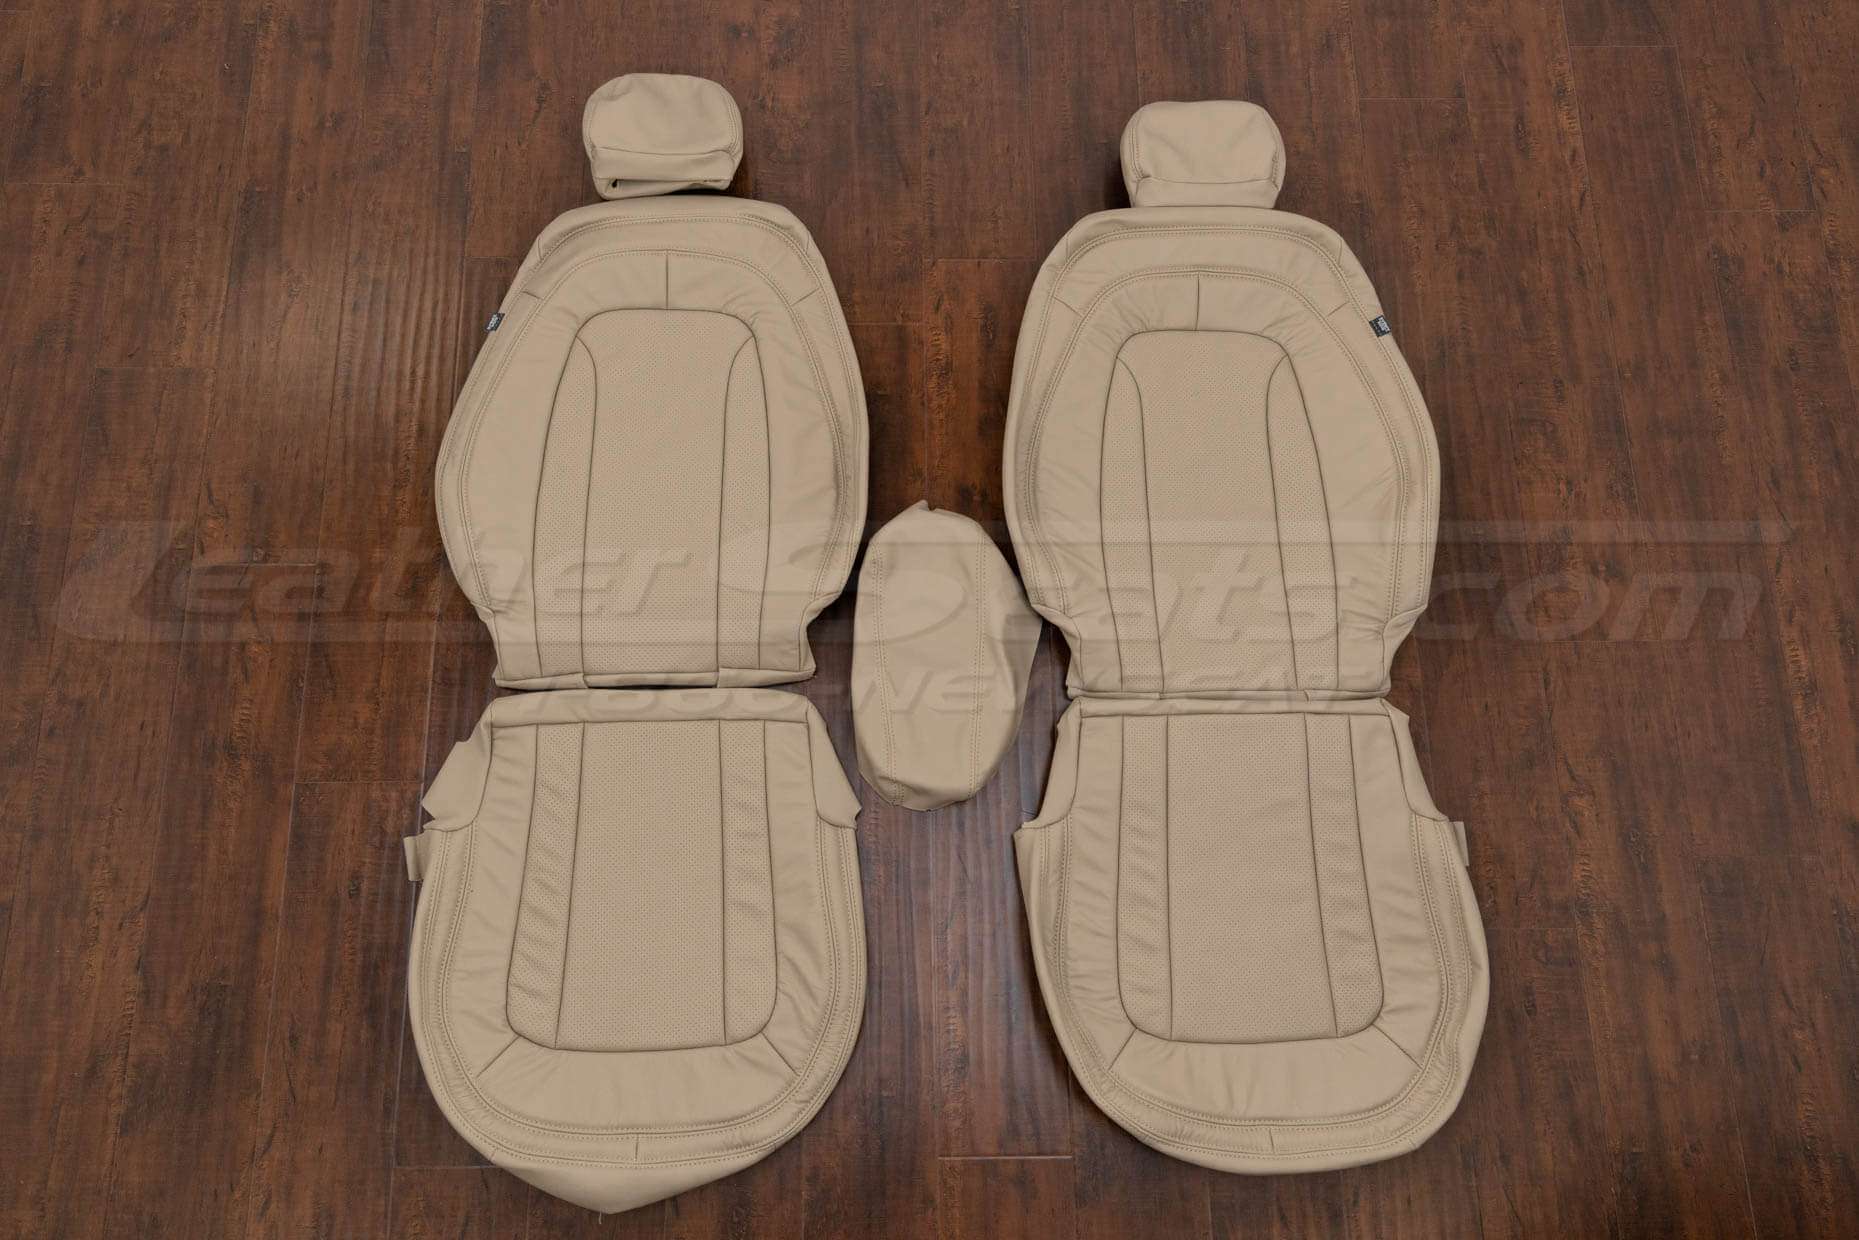 2011 Kia Optima Leather seat Kit - Ivory - Front seat upholstery with console